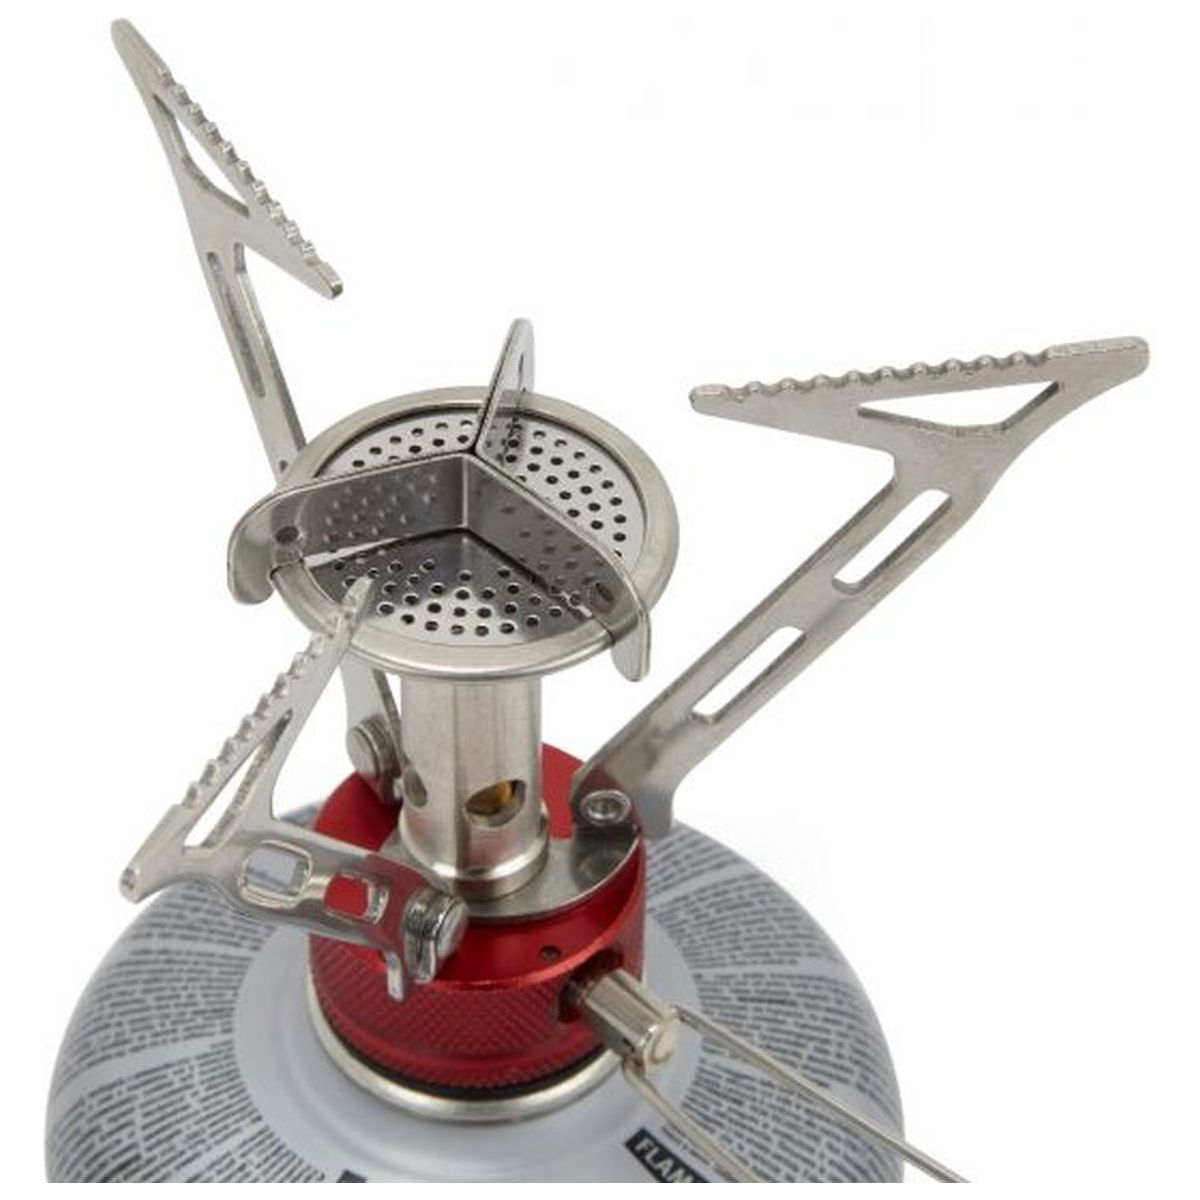 Go System Rapid Backpacking Stove